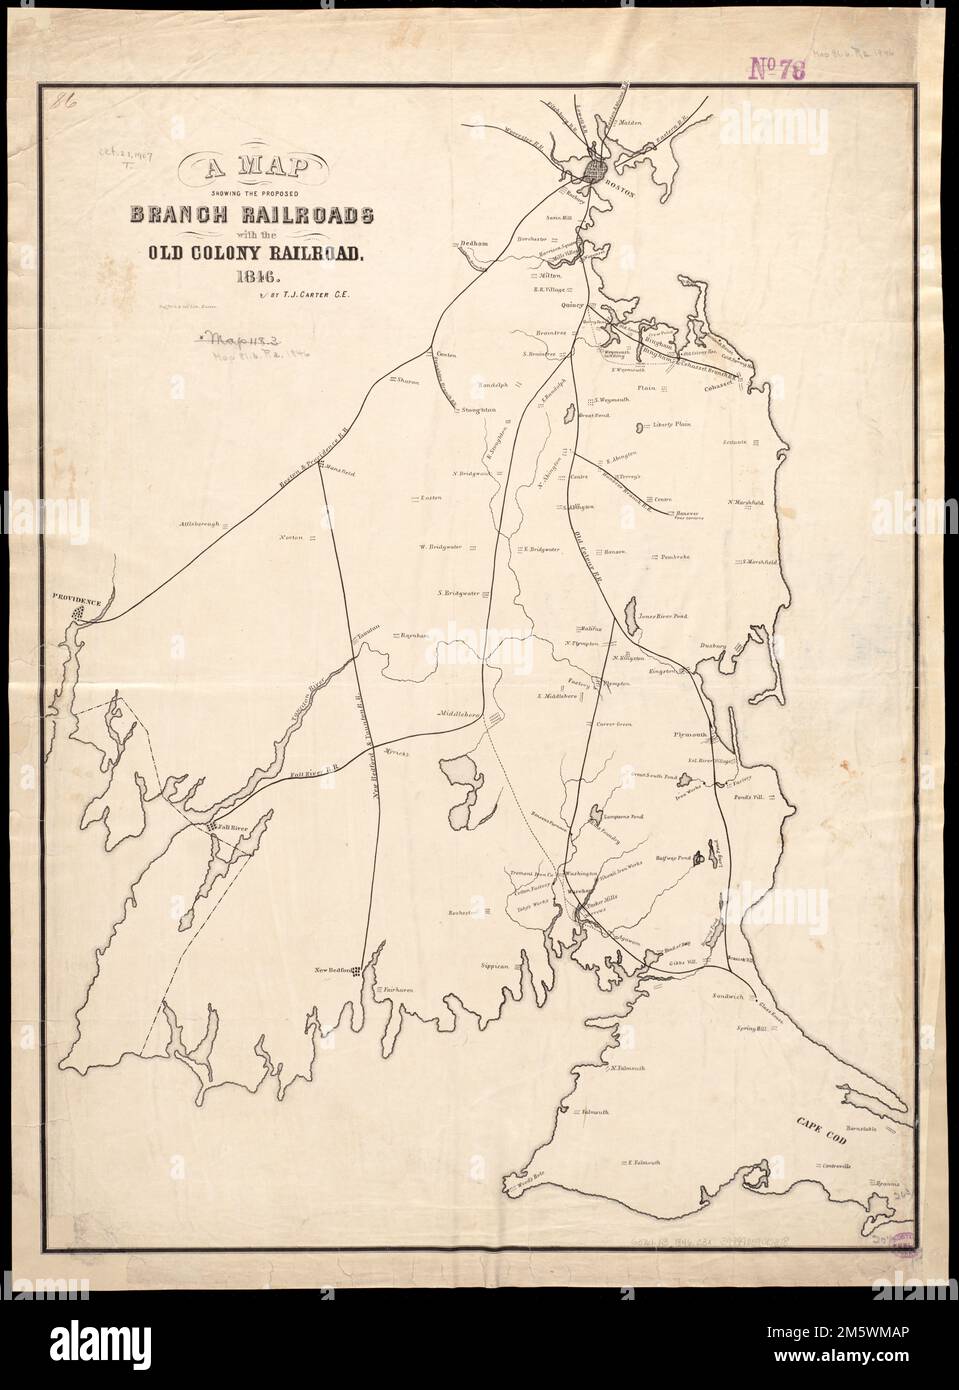 A map showing the proposed branch railroads with the Old Colony Railroad : 1846. Shows lines south from Boston to Providence and Cape Cod.... , Massachusetts Stock Photo